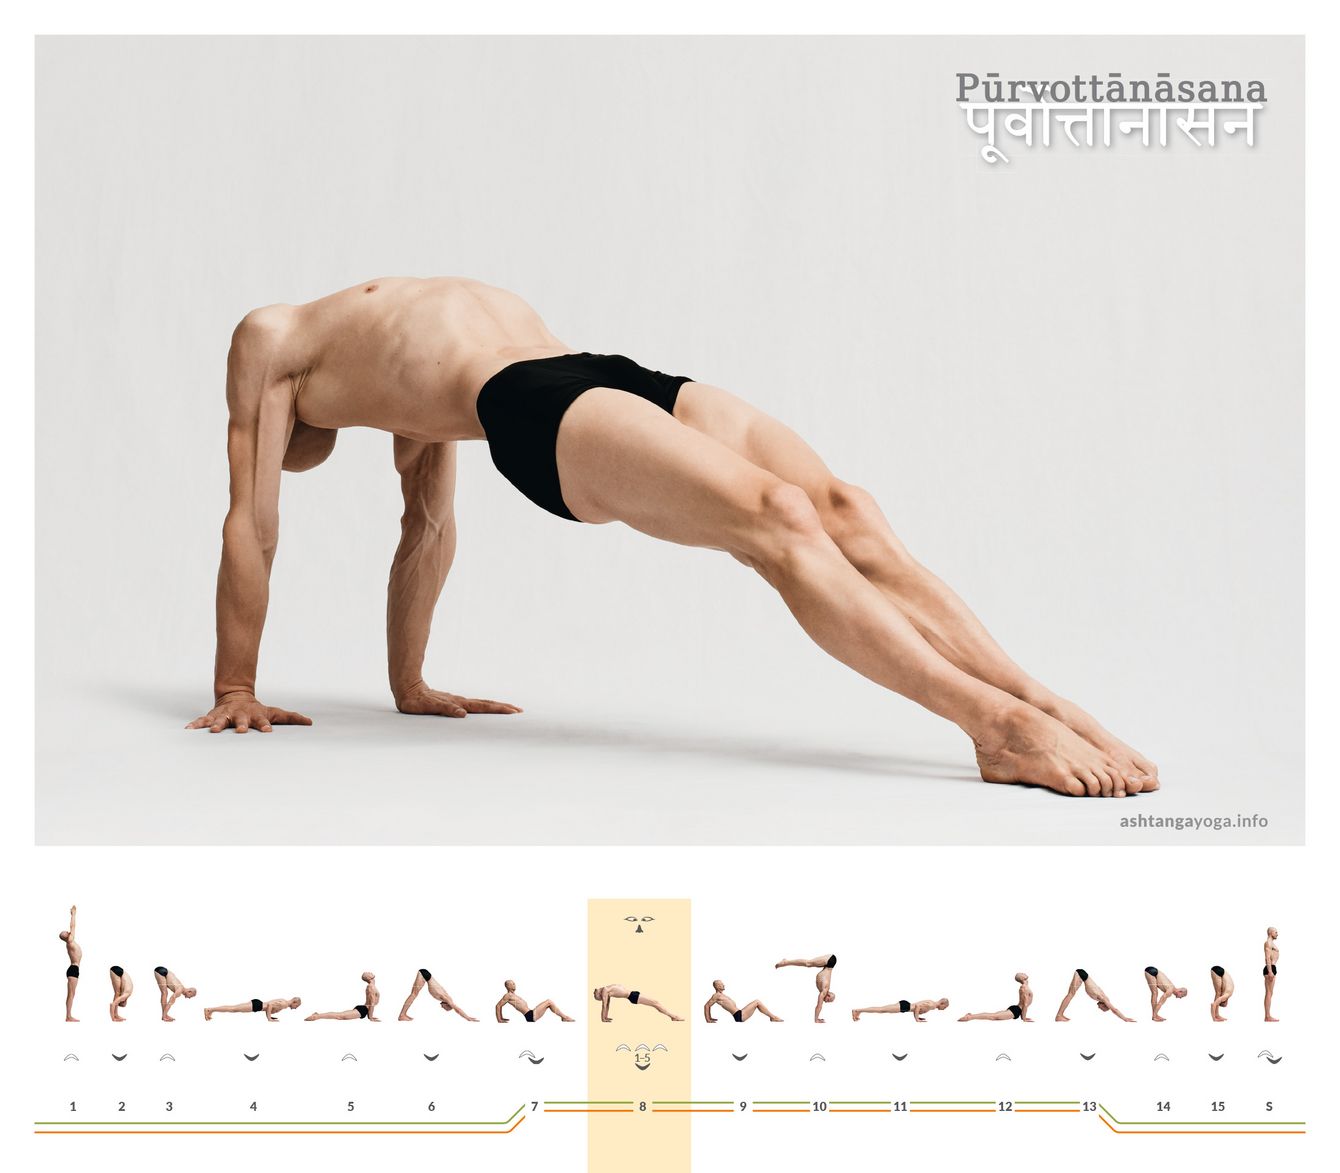 The 'pose to stretch the front of the body' is a powerful, arm-supported posture where the entire front body is stretched and facing upwards - Purvottanasana.